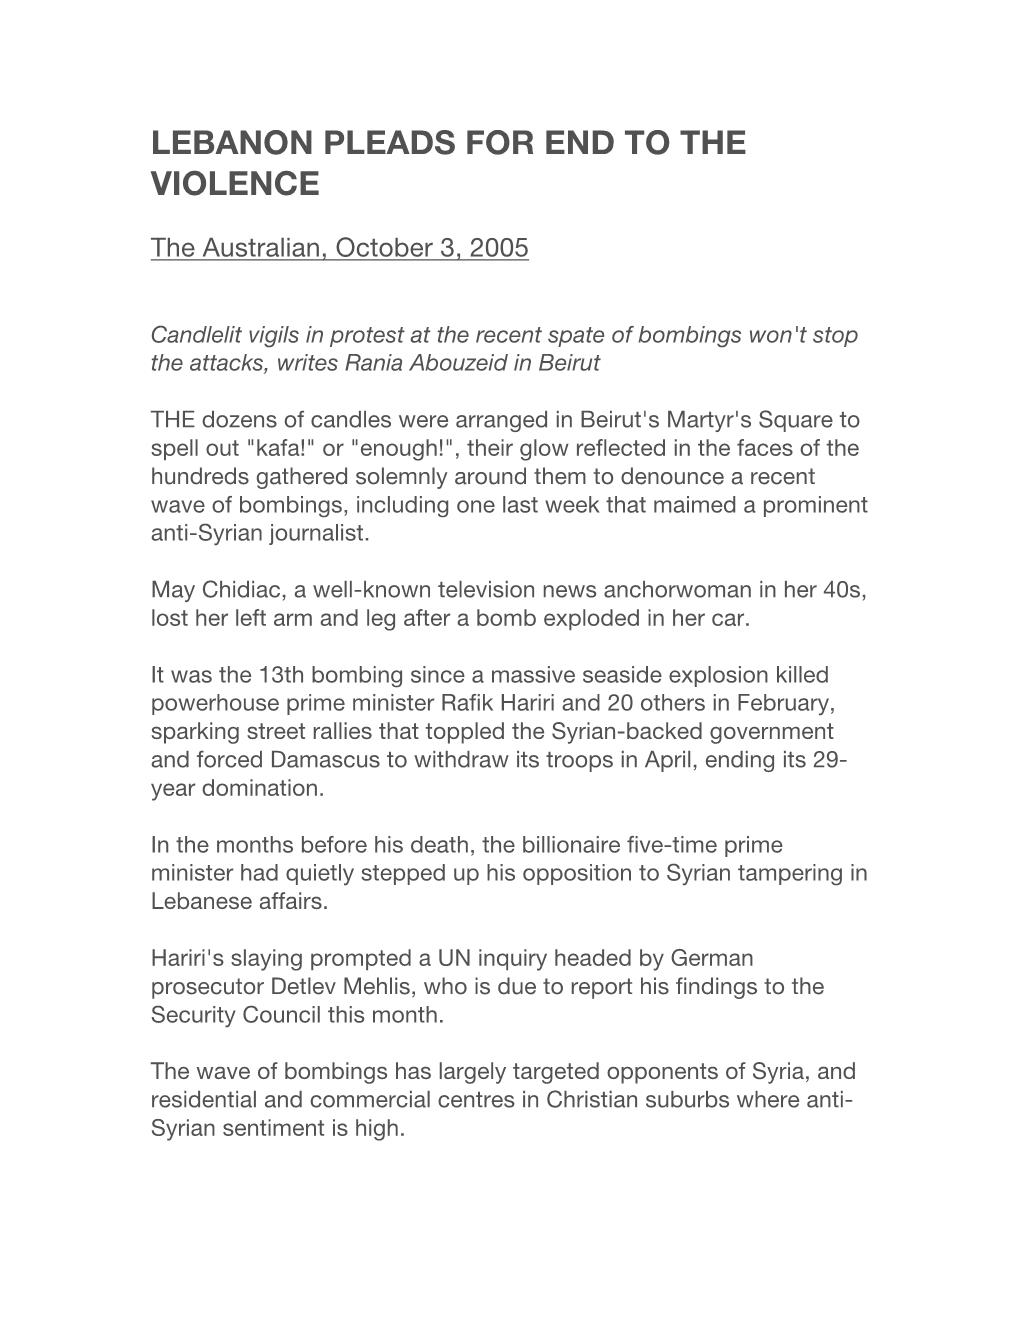 Lebanon Pleads for End to the Violence